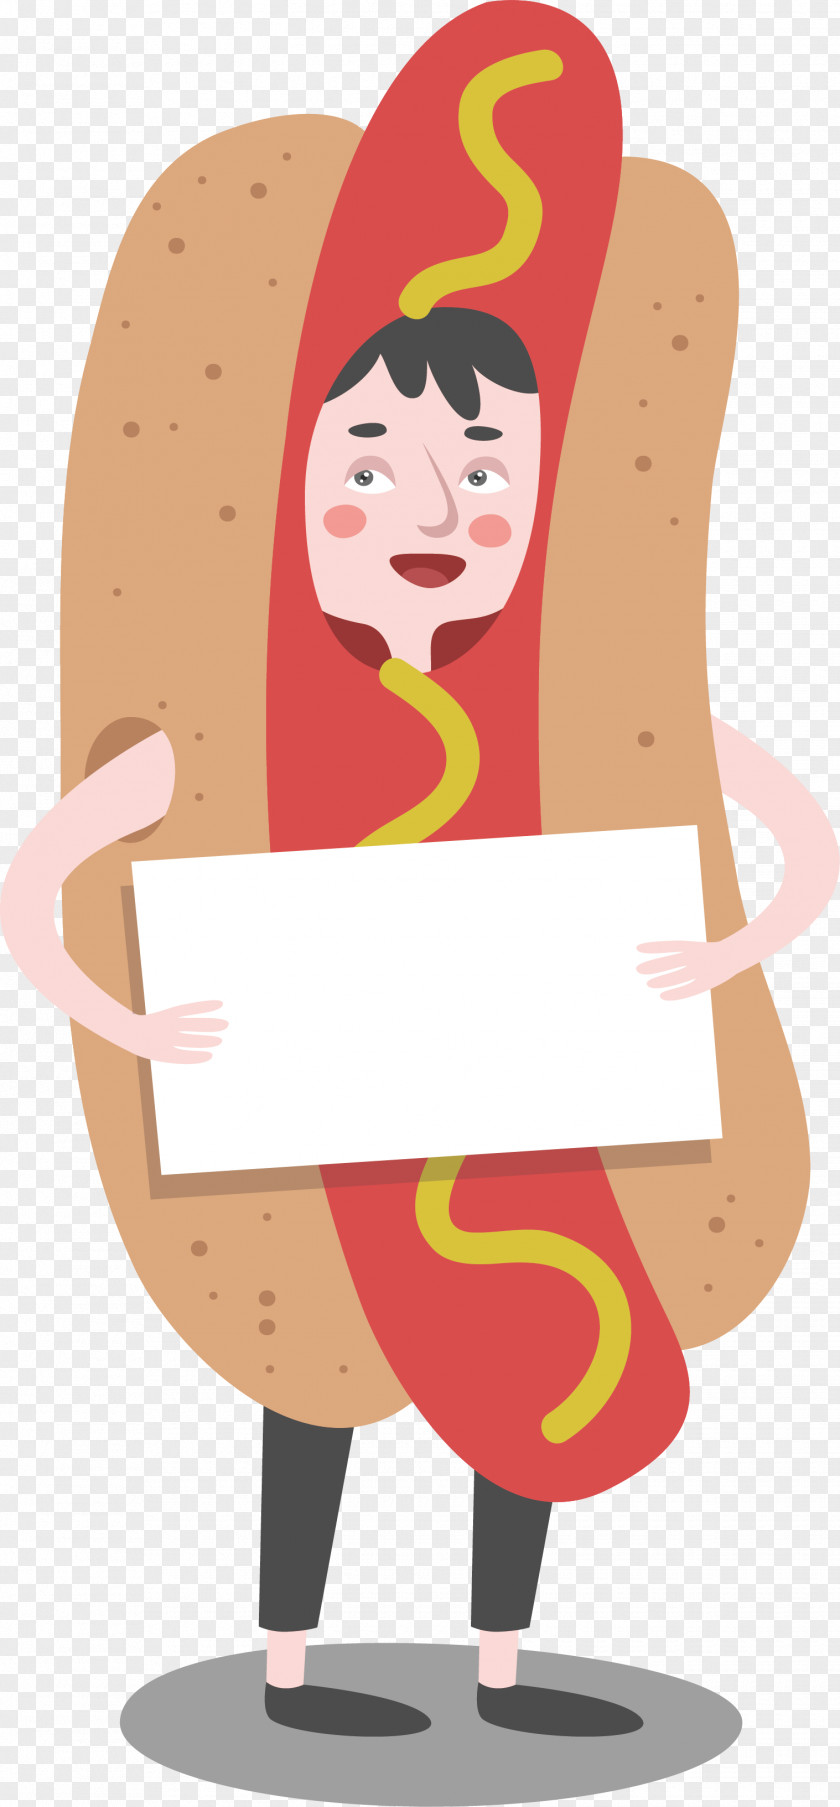 The Man Who Dressed Hot Dogs Dog Hamburger Sausage PNG